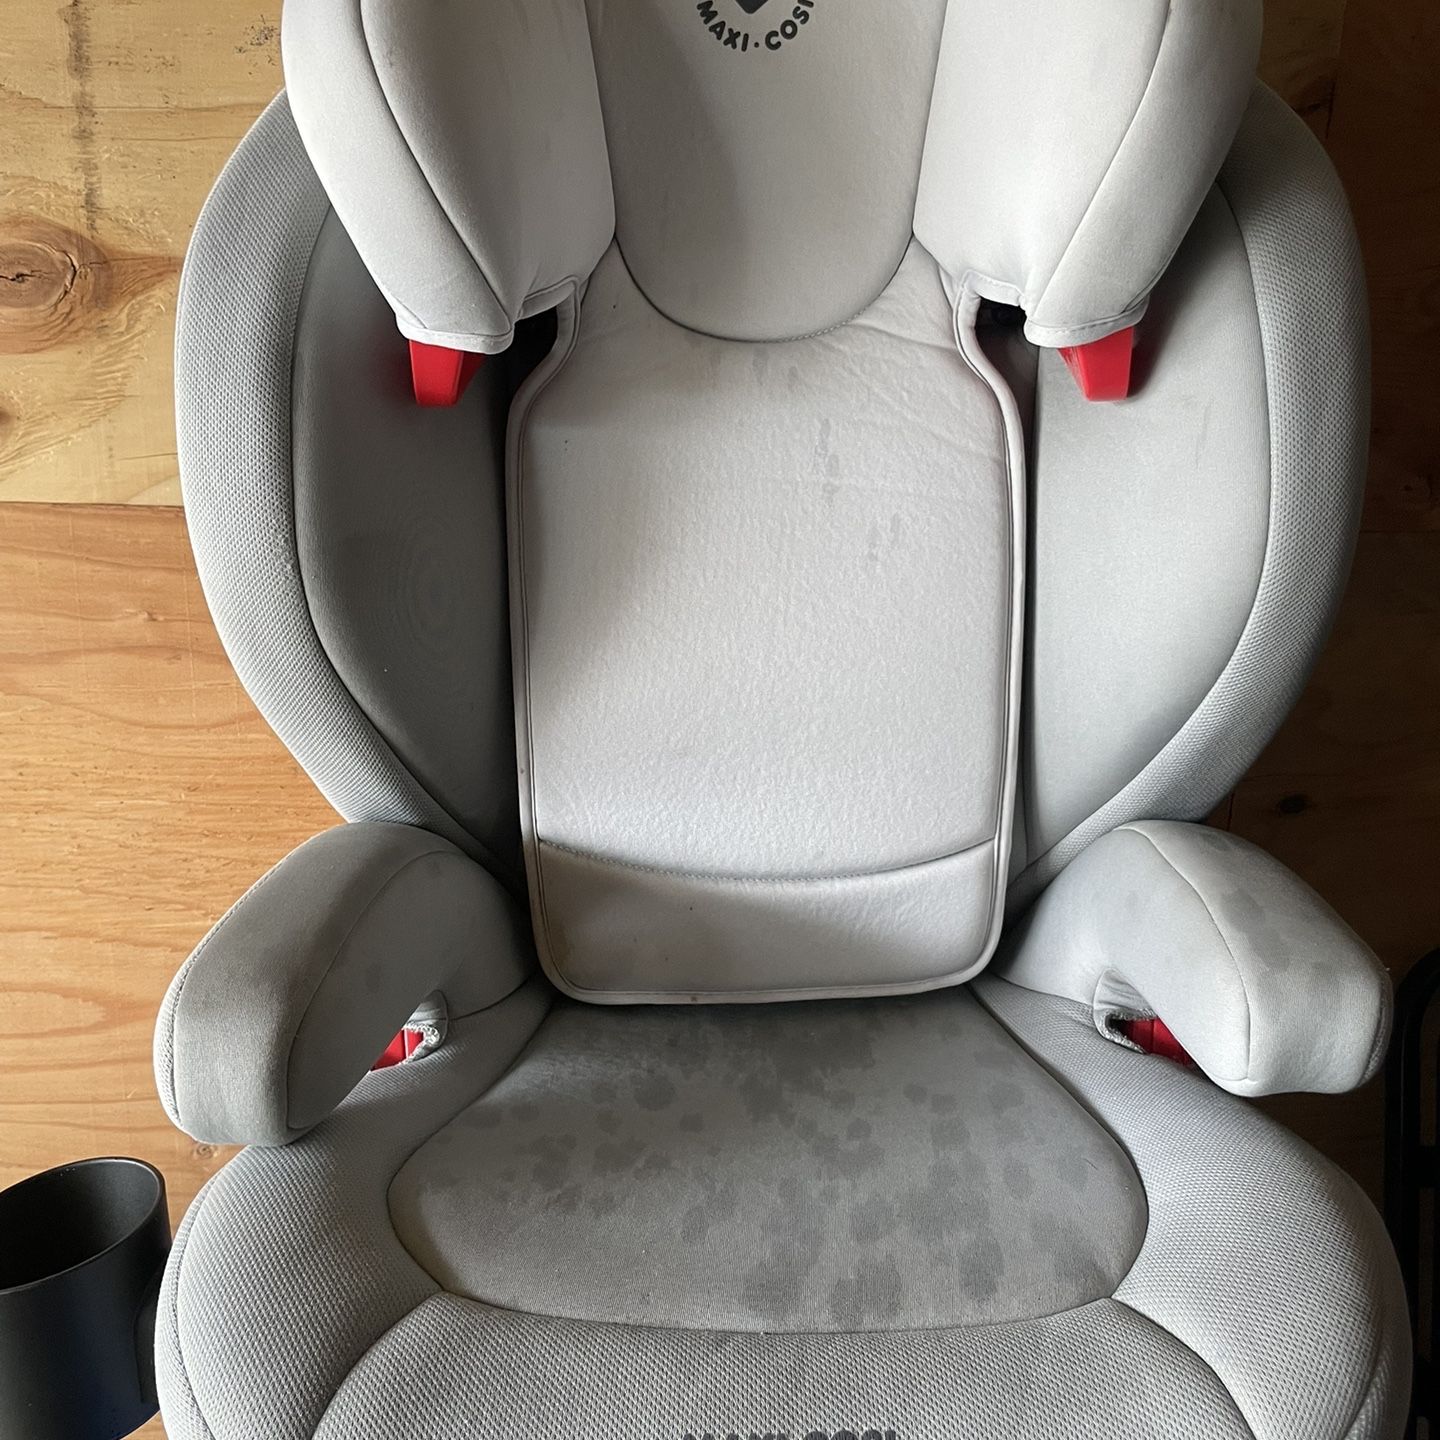 Maxi-Cosí Kids Booster Seat